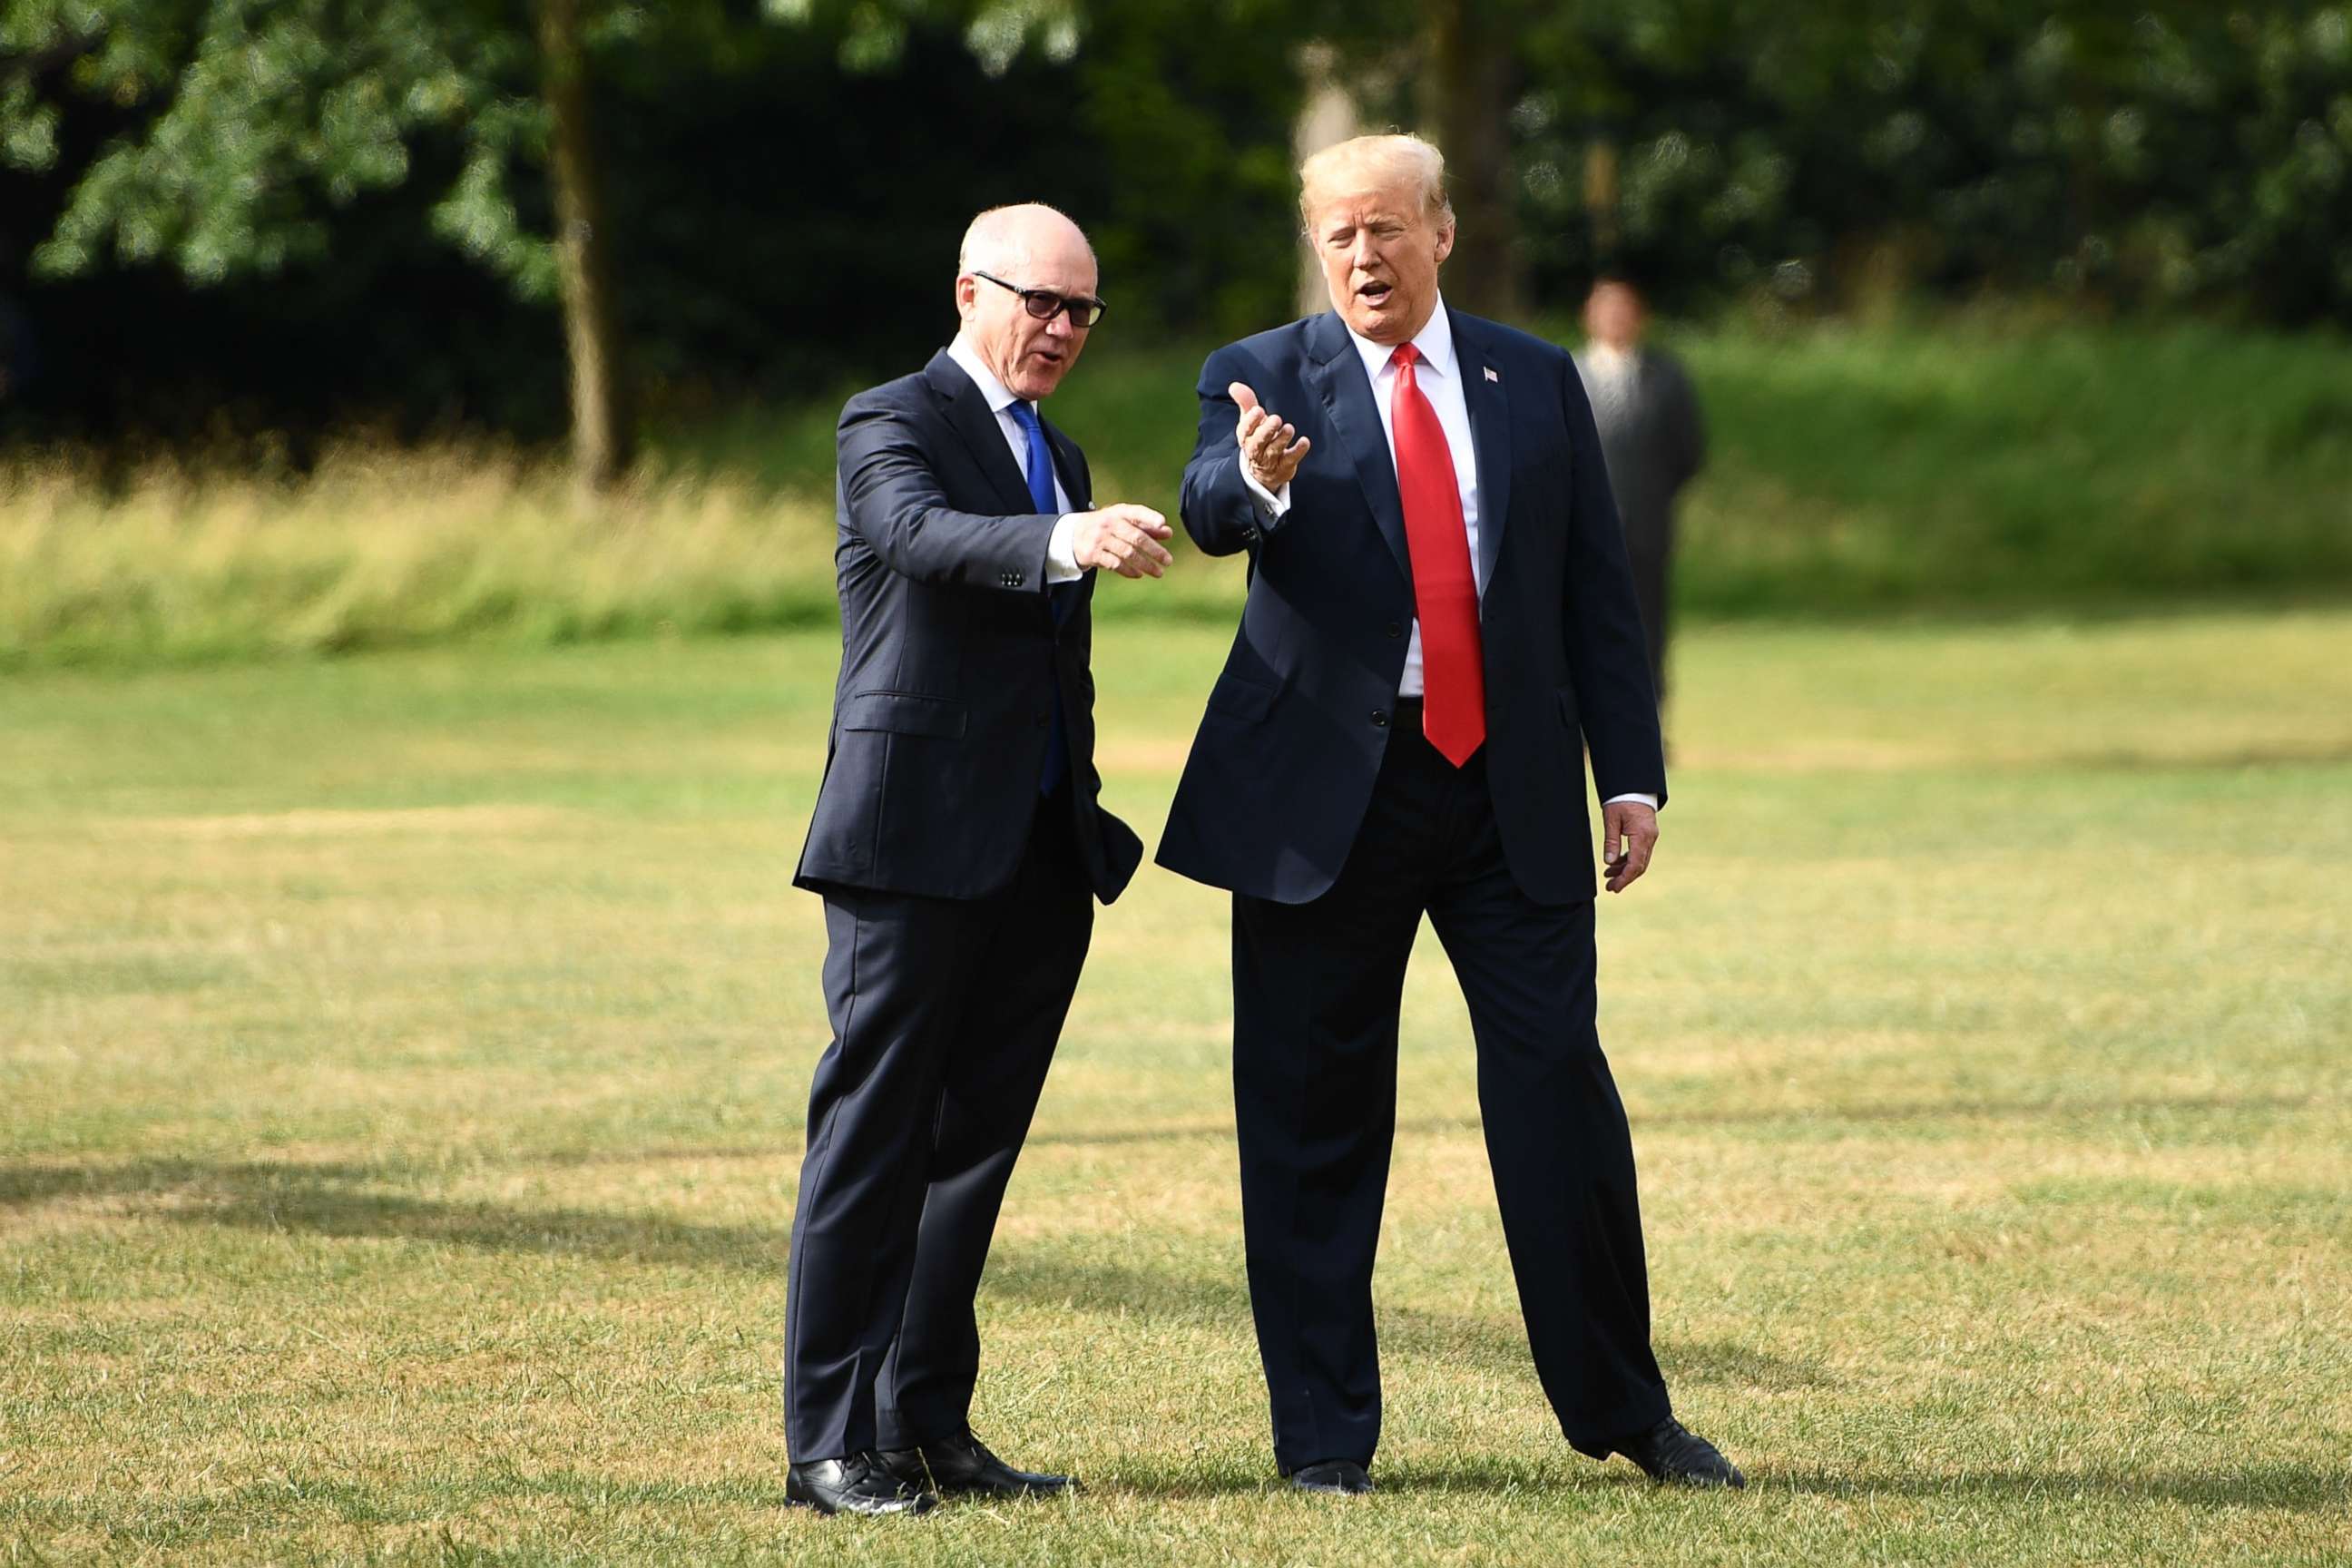 PHOTO: US President Donald Trump gestures as he talks with US Ambassador to the United Kingdom Woody Johnson preparing to board Marine One to depart the US ambassador's residence Winfield House in London on July 13, 2018.